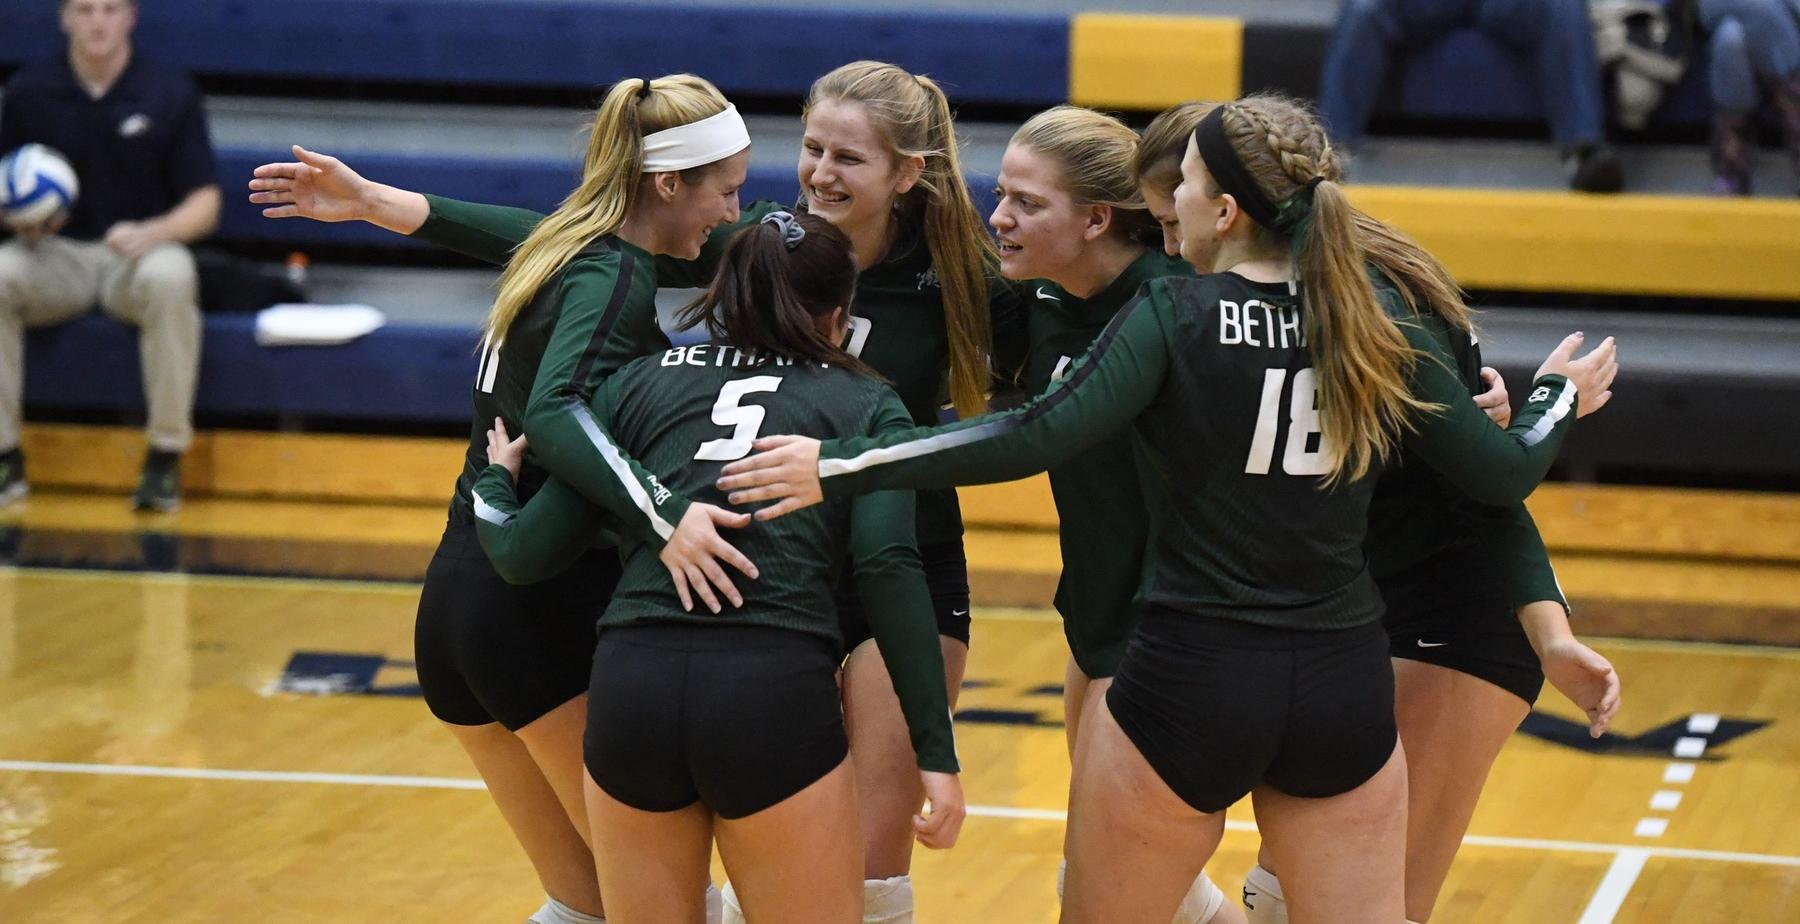 Bethany Favored in PAC Women's Volleyball Preseason Coaches’ Poll